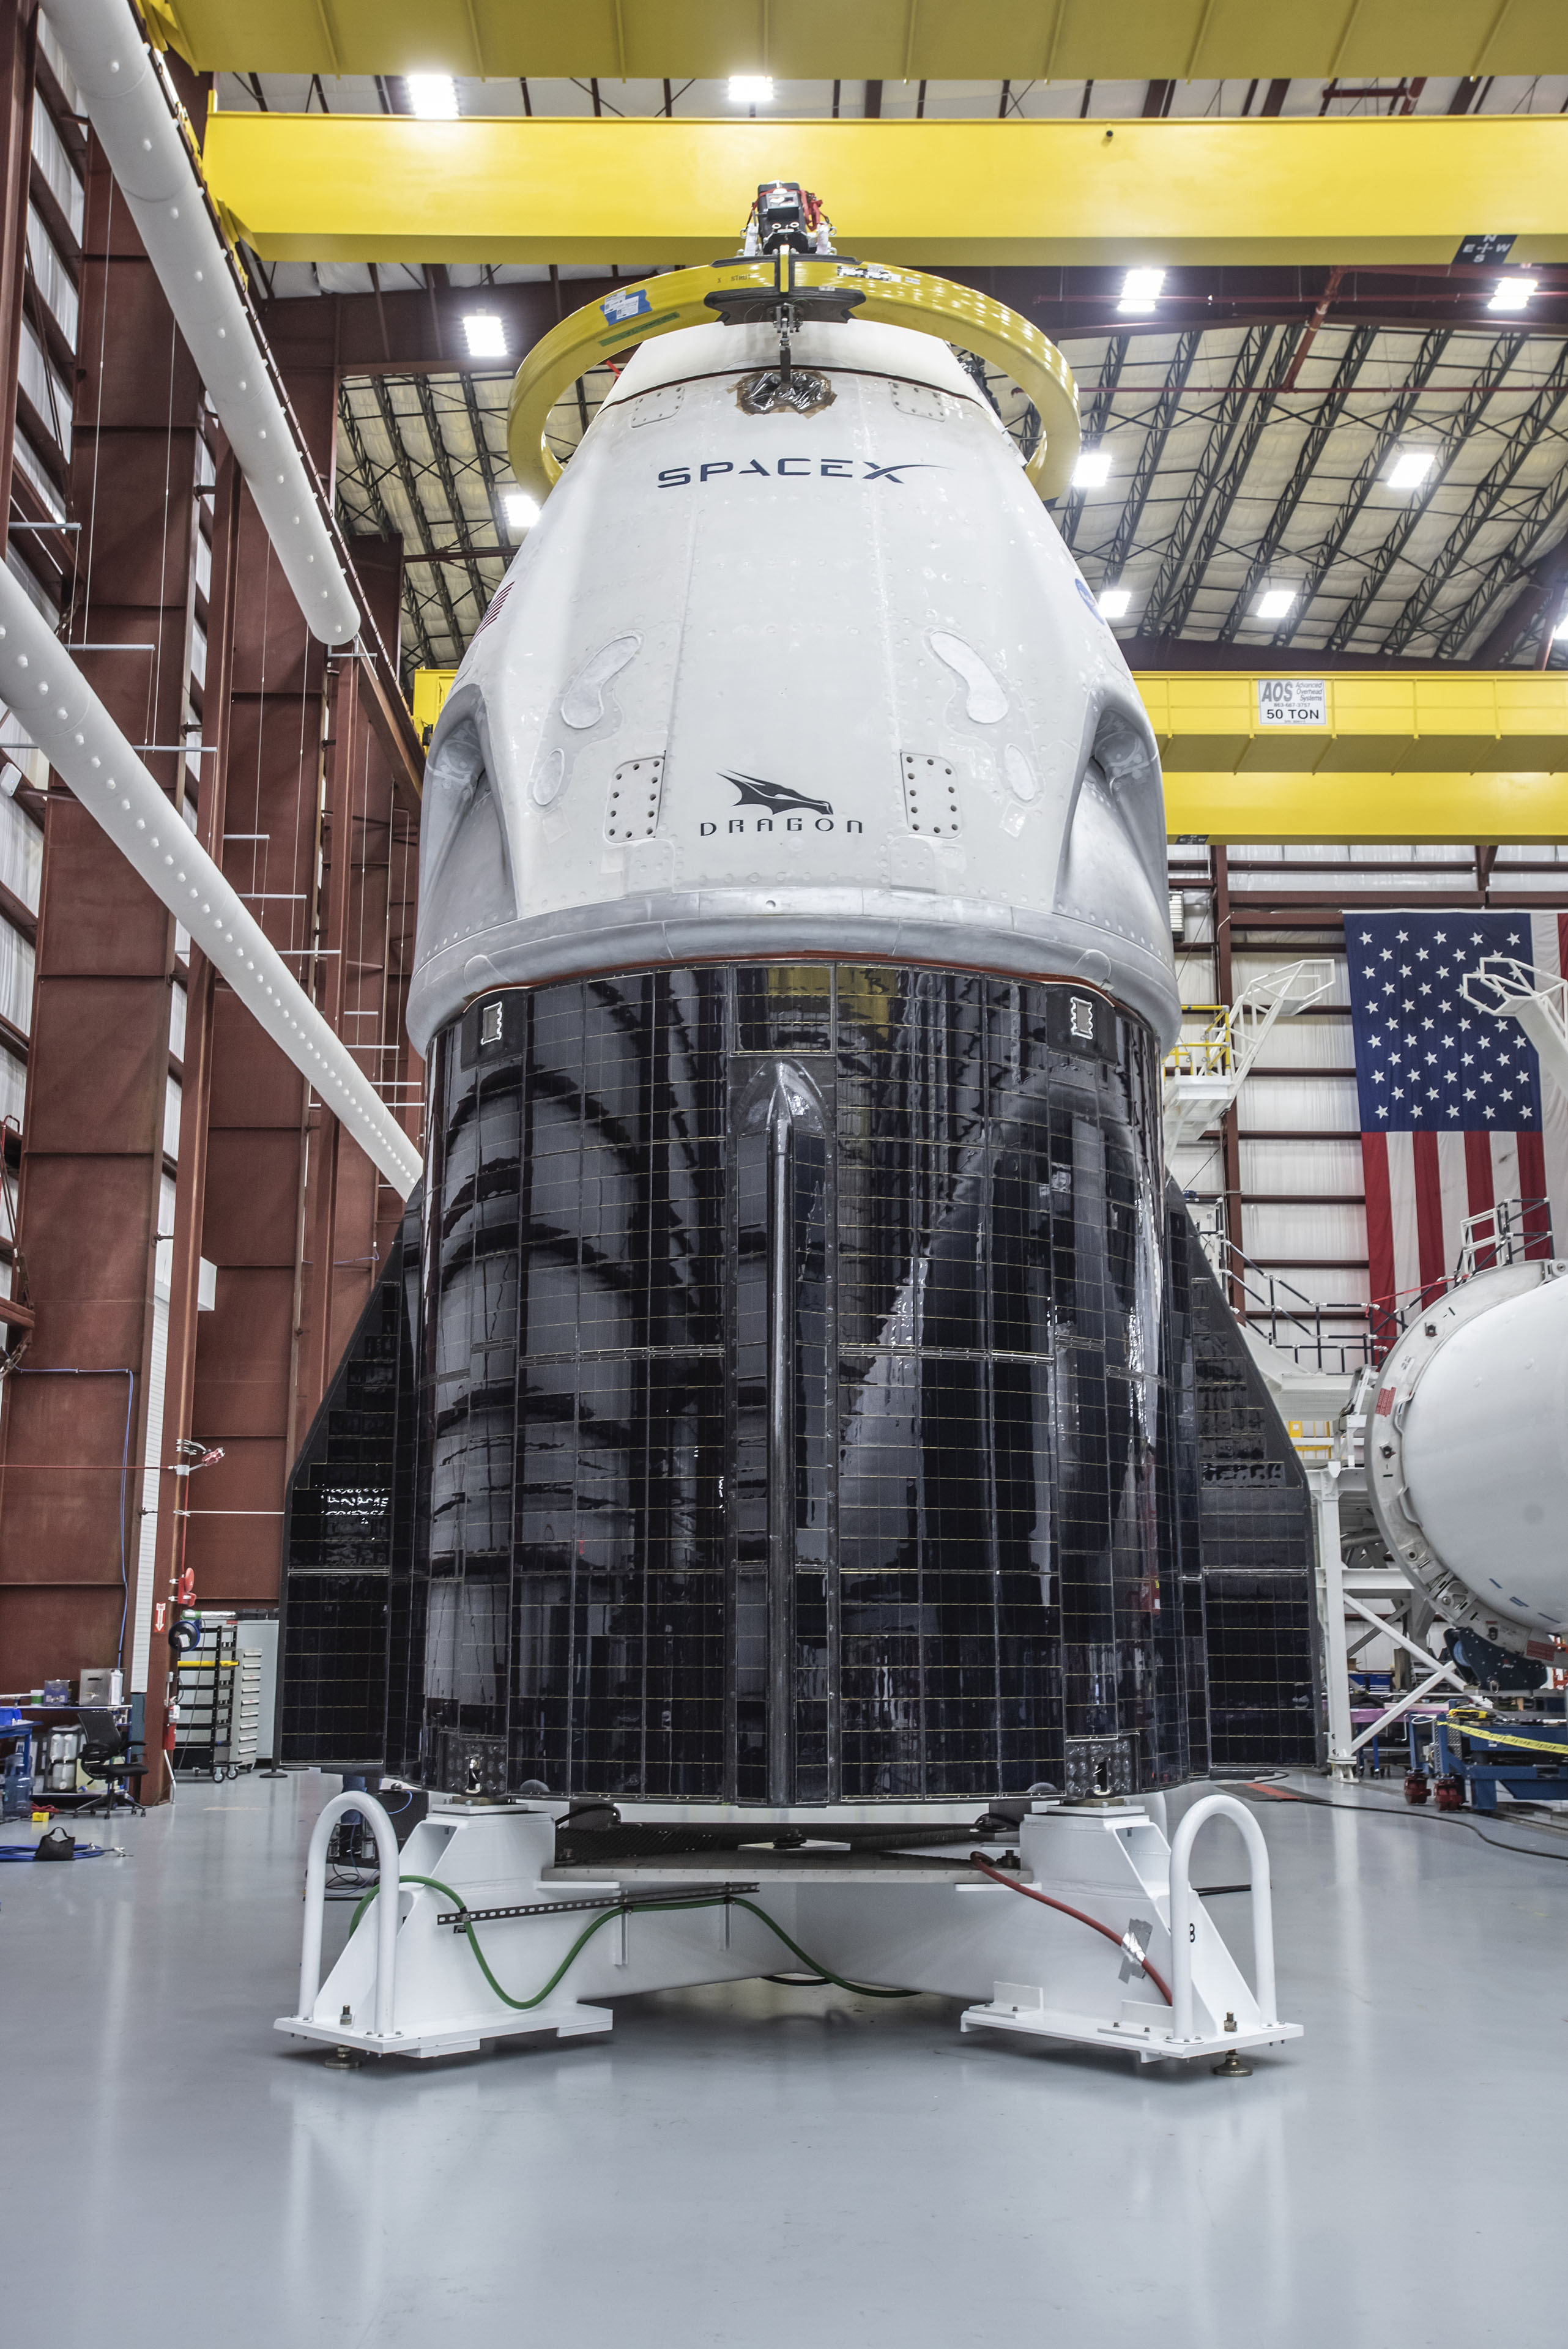 SpaceX Crew Dragon ready for test flight - The Planetary Society